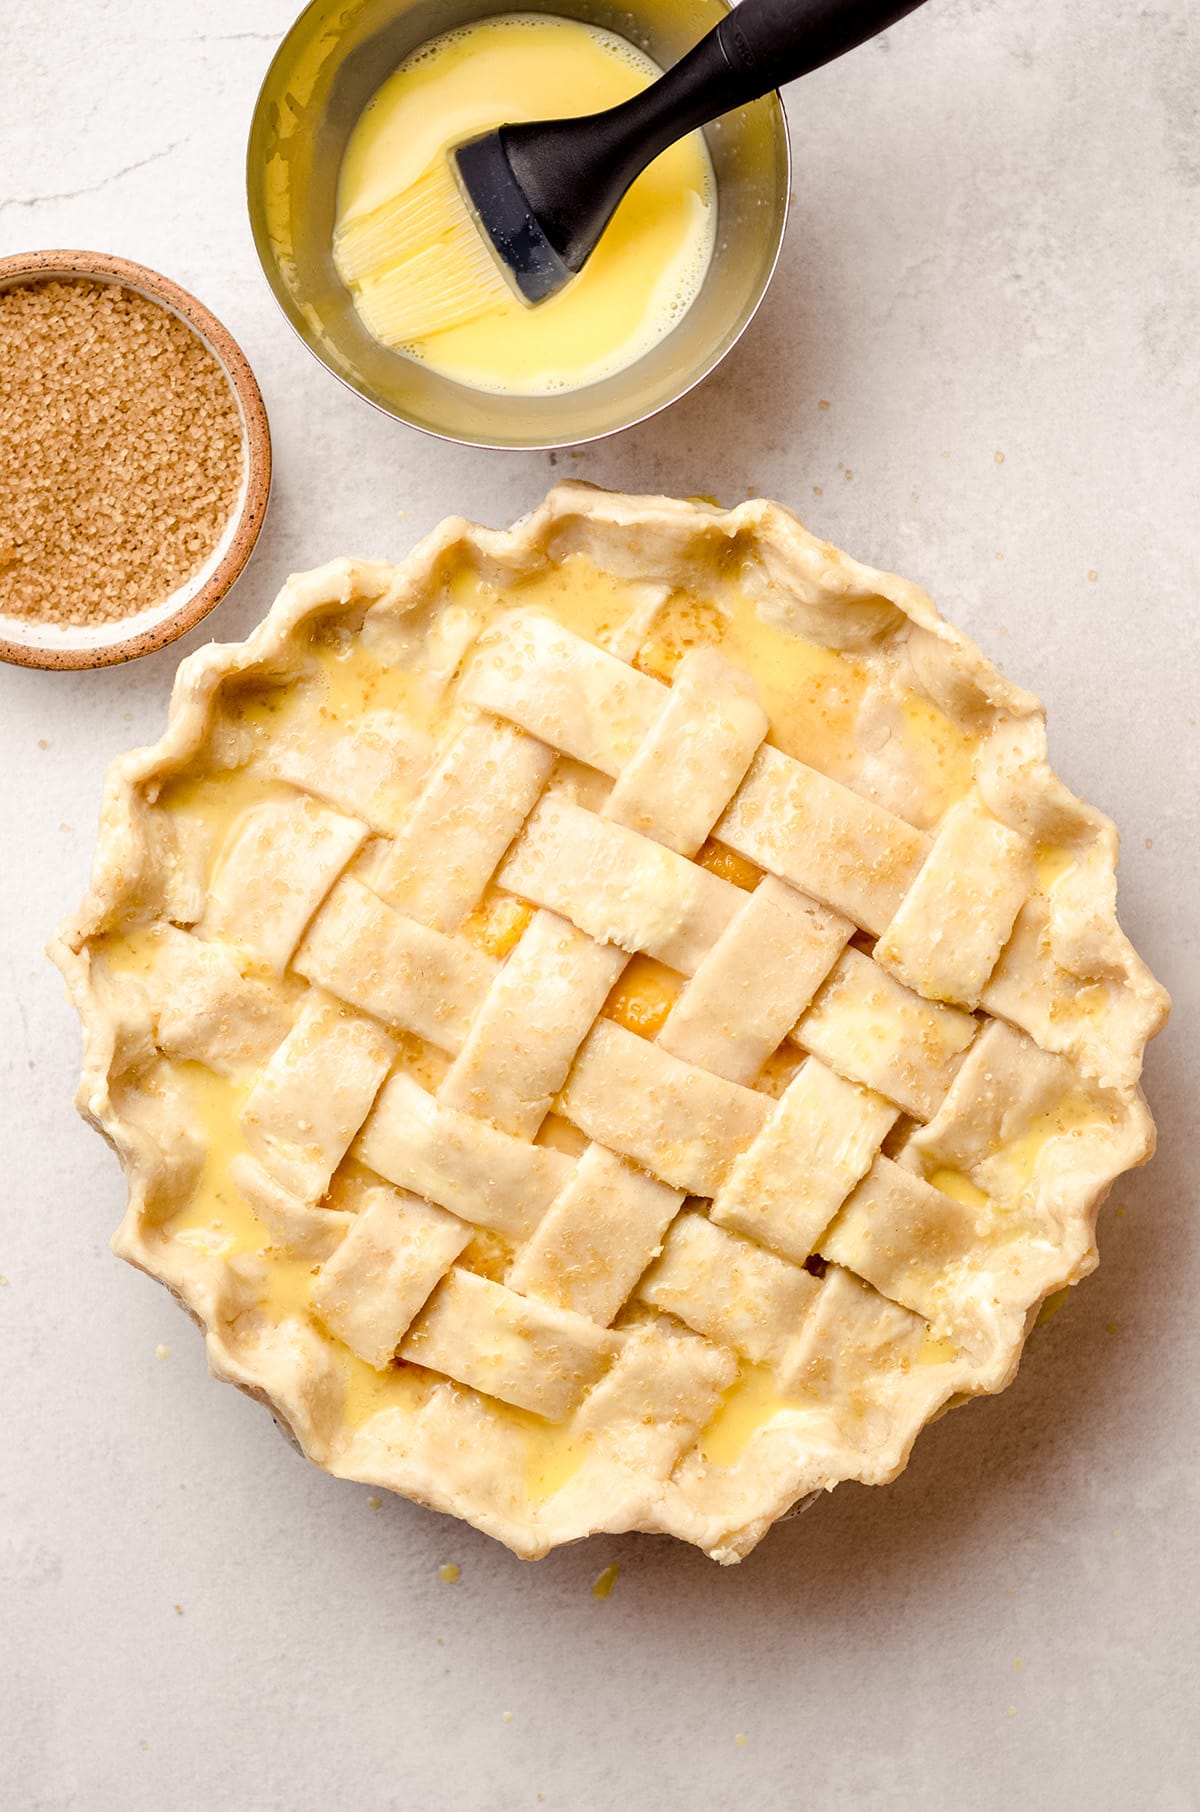 A lattice crust pie, brushed with an egg wash.